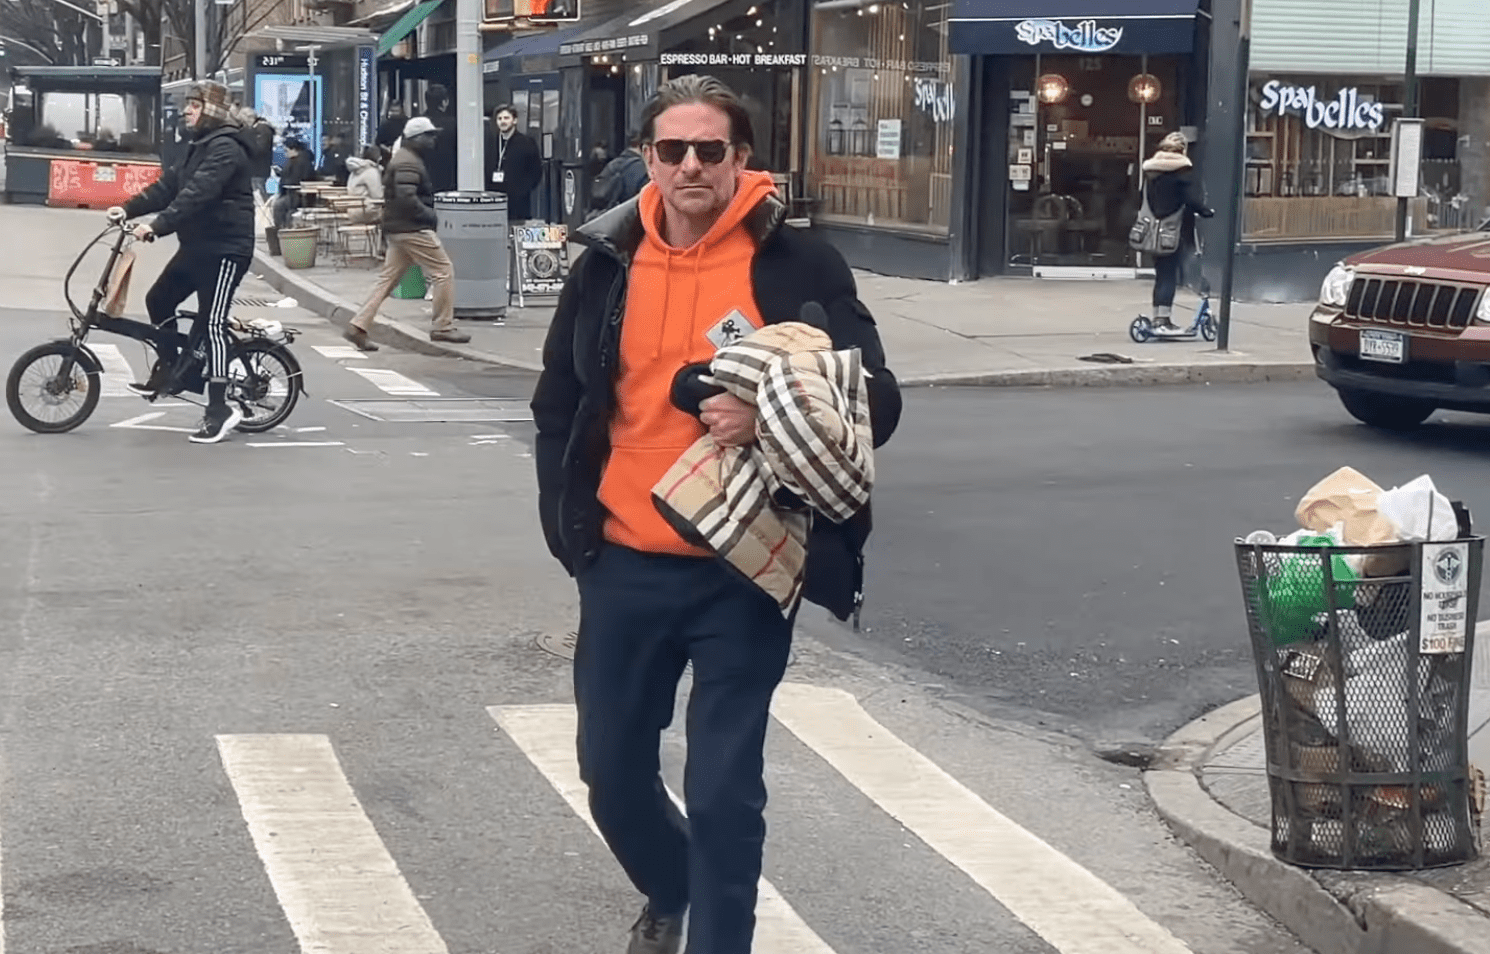 Bradley Cooper seen walking while holding a small coat in New York City on January 5, 2023 | Source: YouTube/The Hollywood Fix